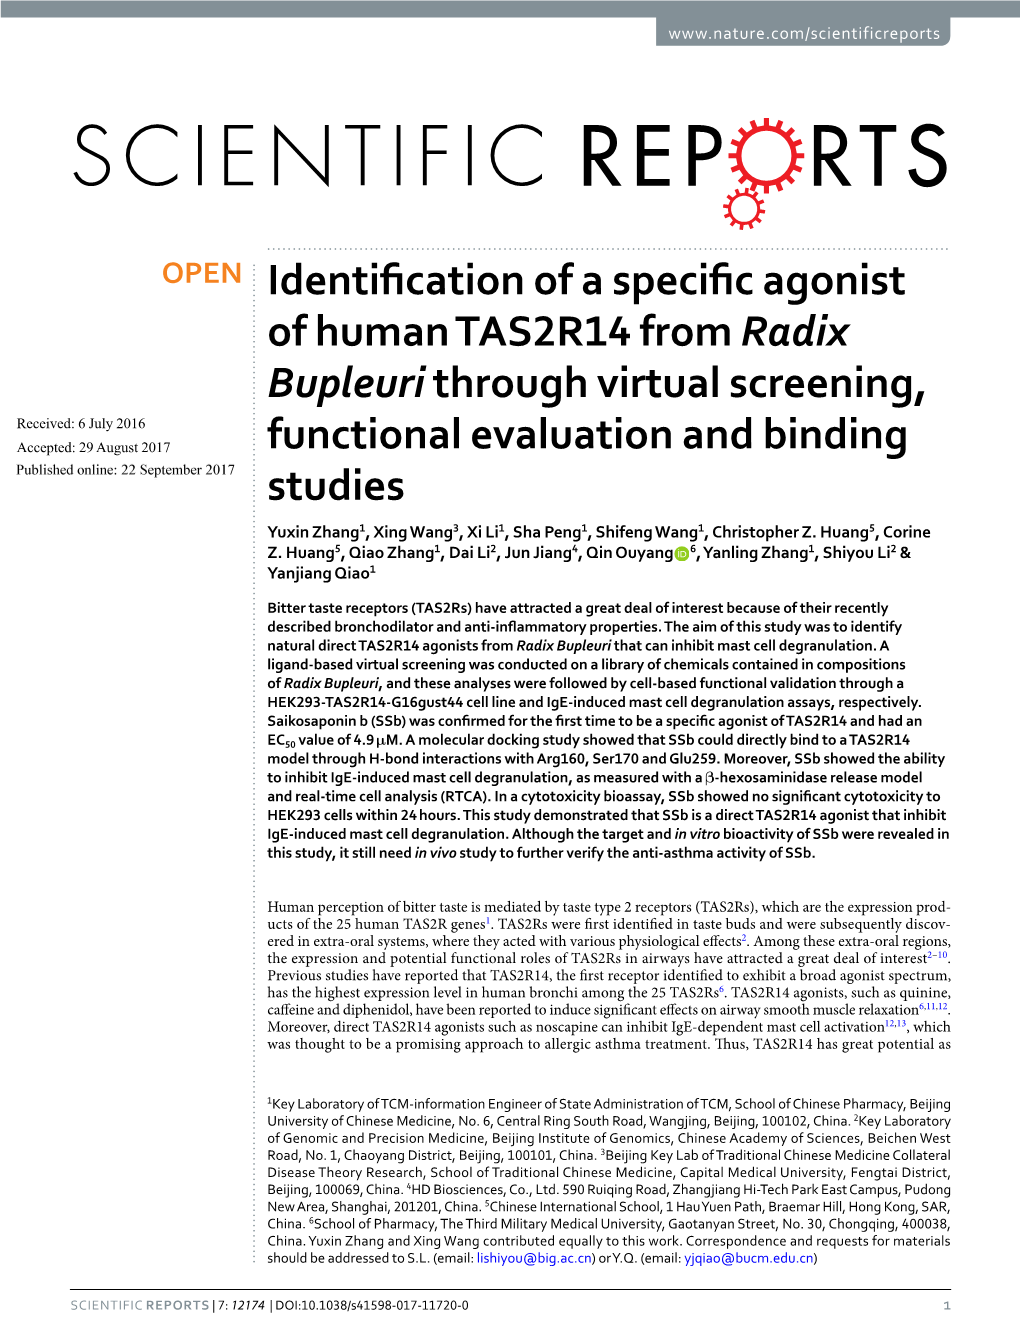 Identification of a Specific Agonist of Human TAS2R14 from Radix